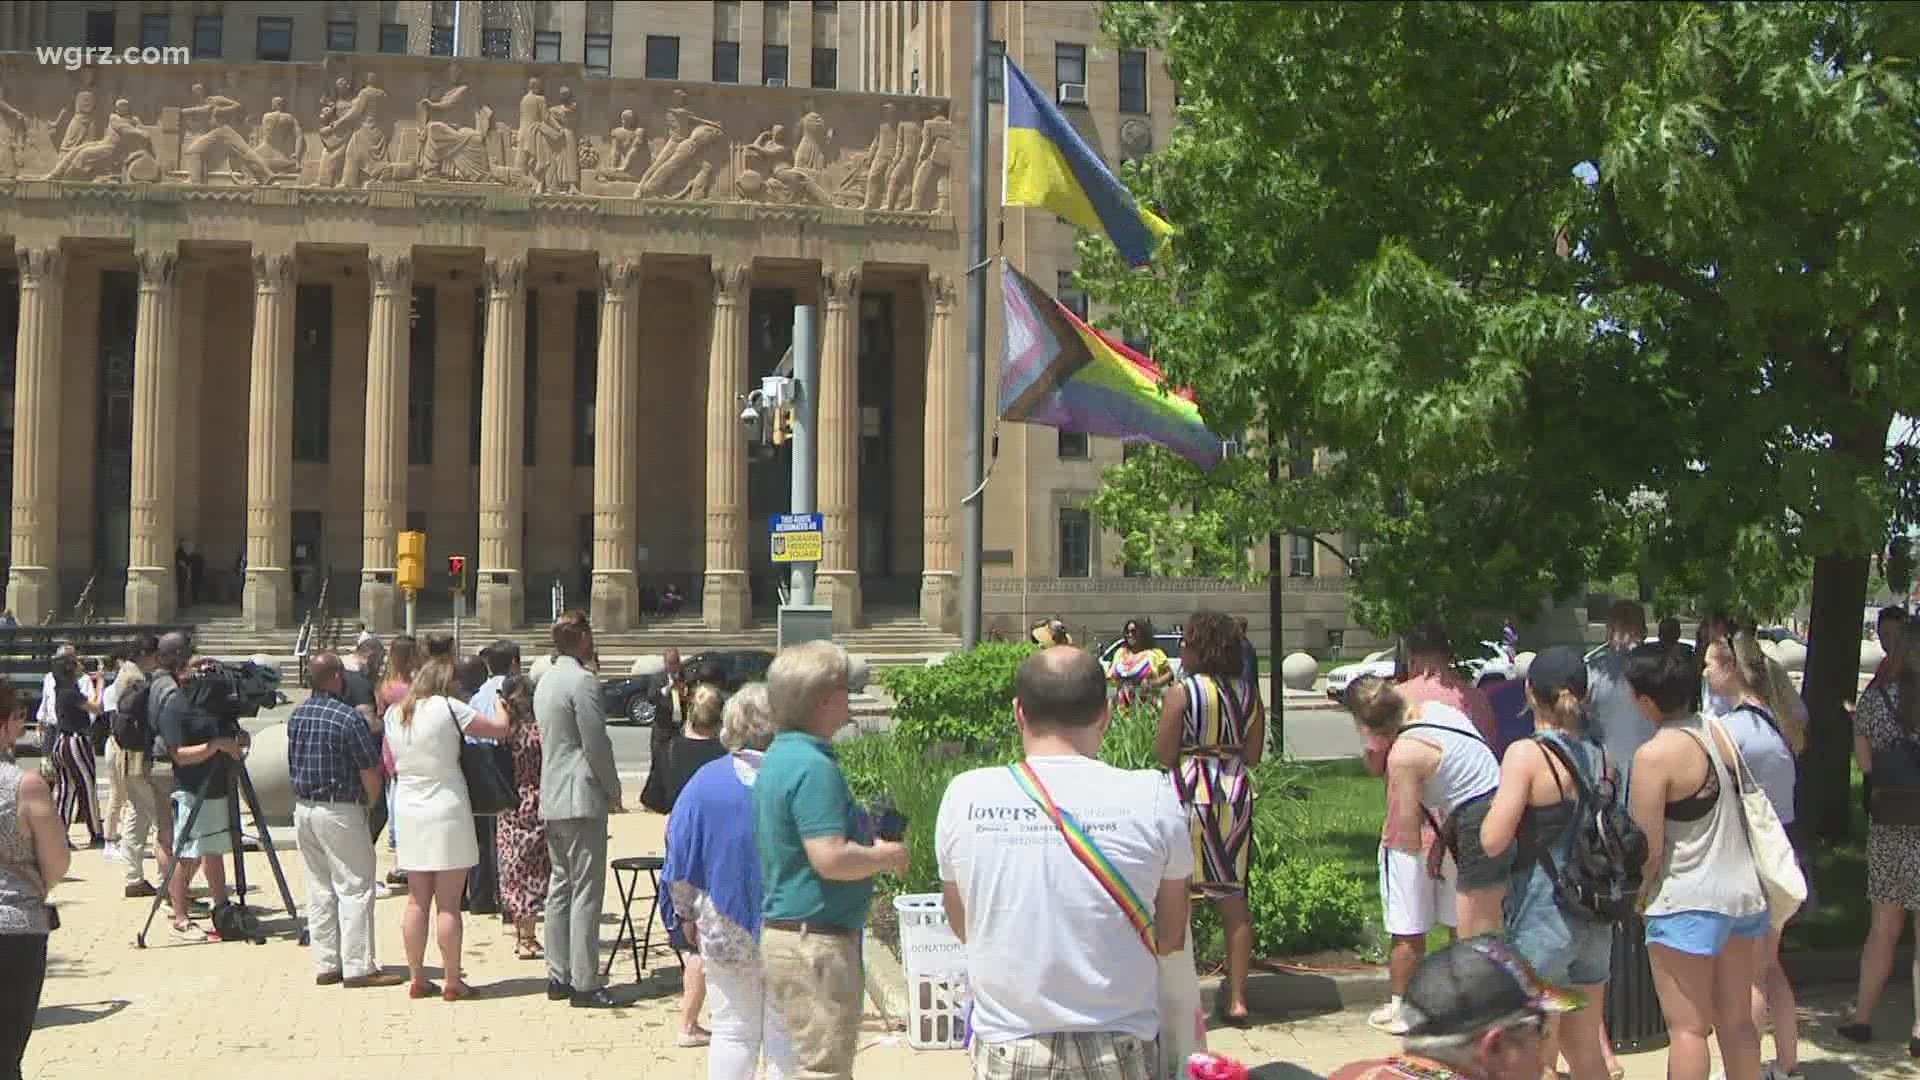 Check out our 'GUIDE 2 PRIDE' page on the free WGRZ app.